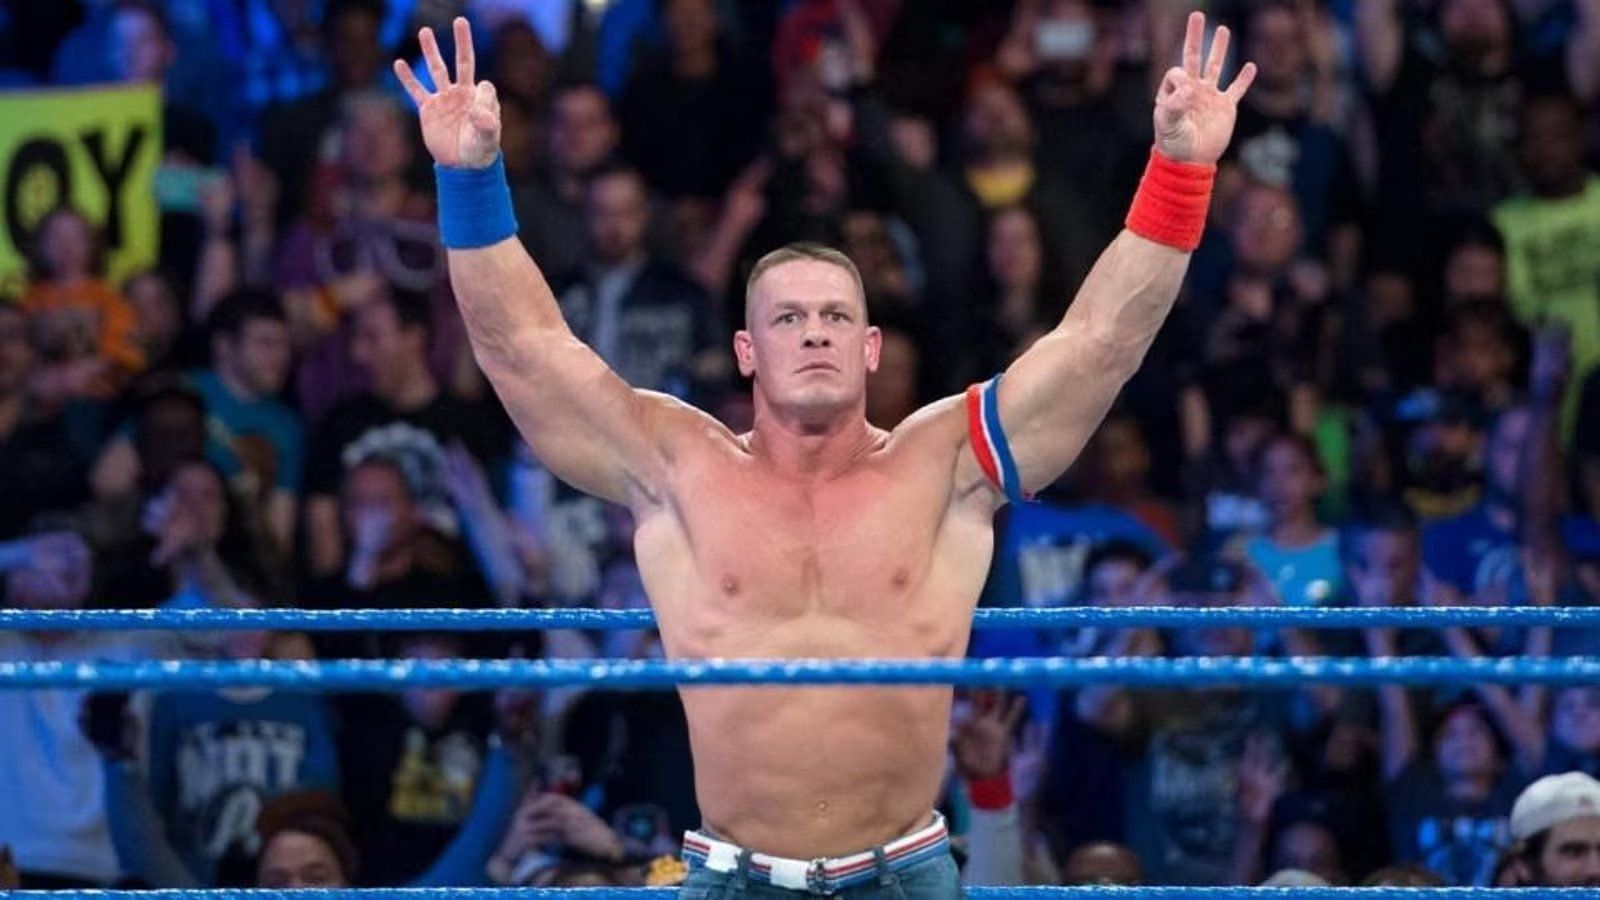 John Cena is a 16-time world champion in WWE!